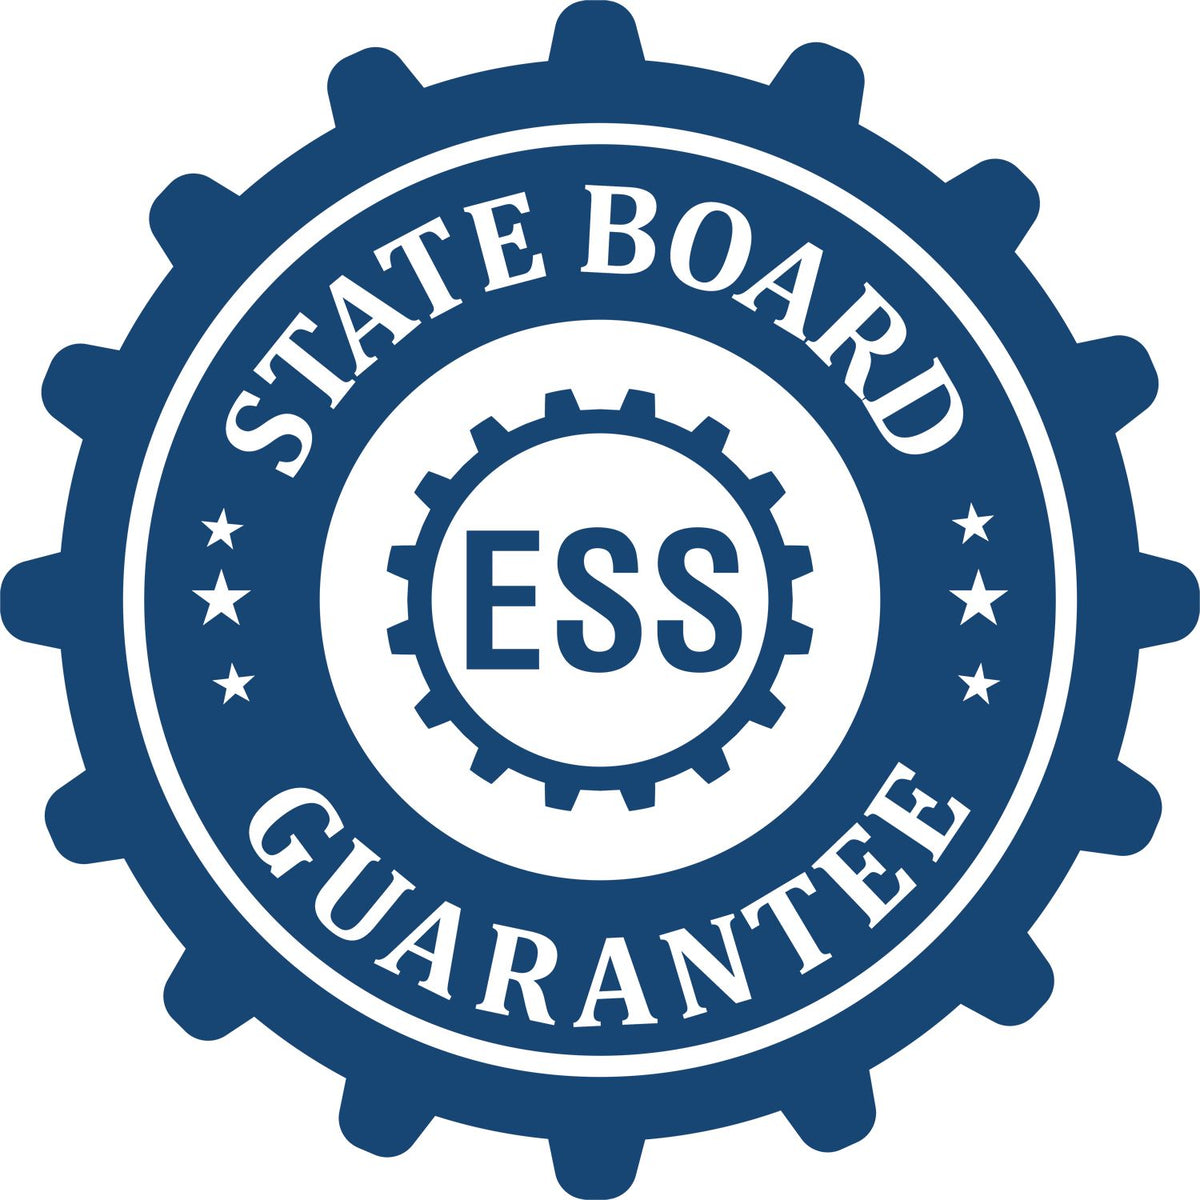 An emblem in a gear shape illustrating a state board guarantee for the Kansas Landscape Architectural Seal Stamp product.